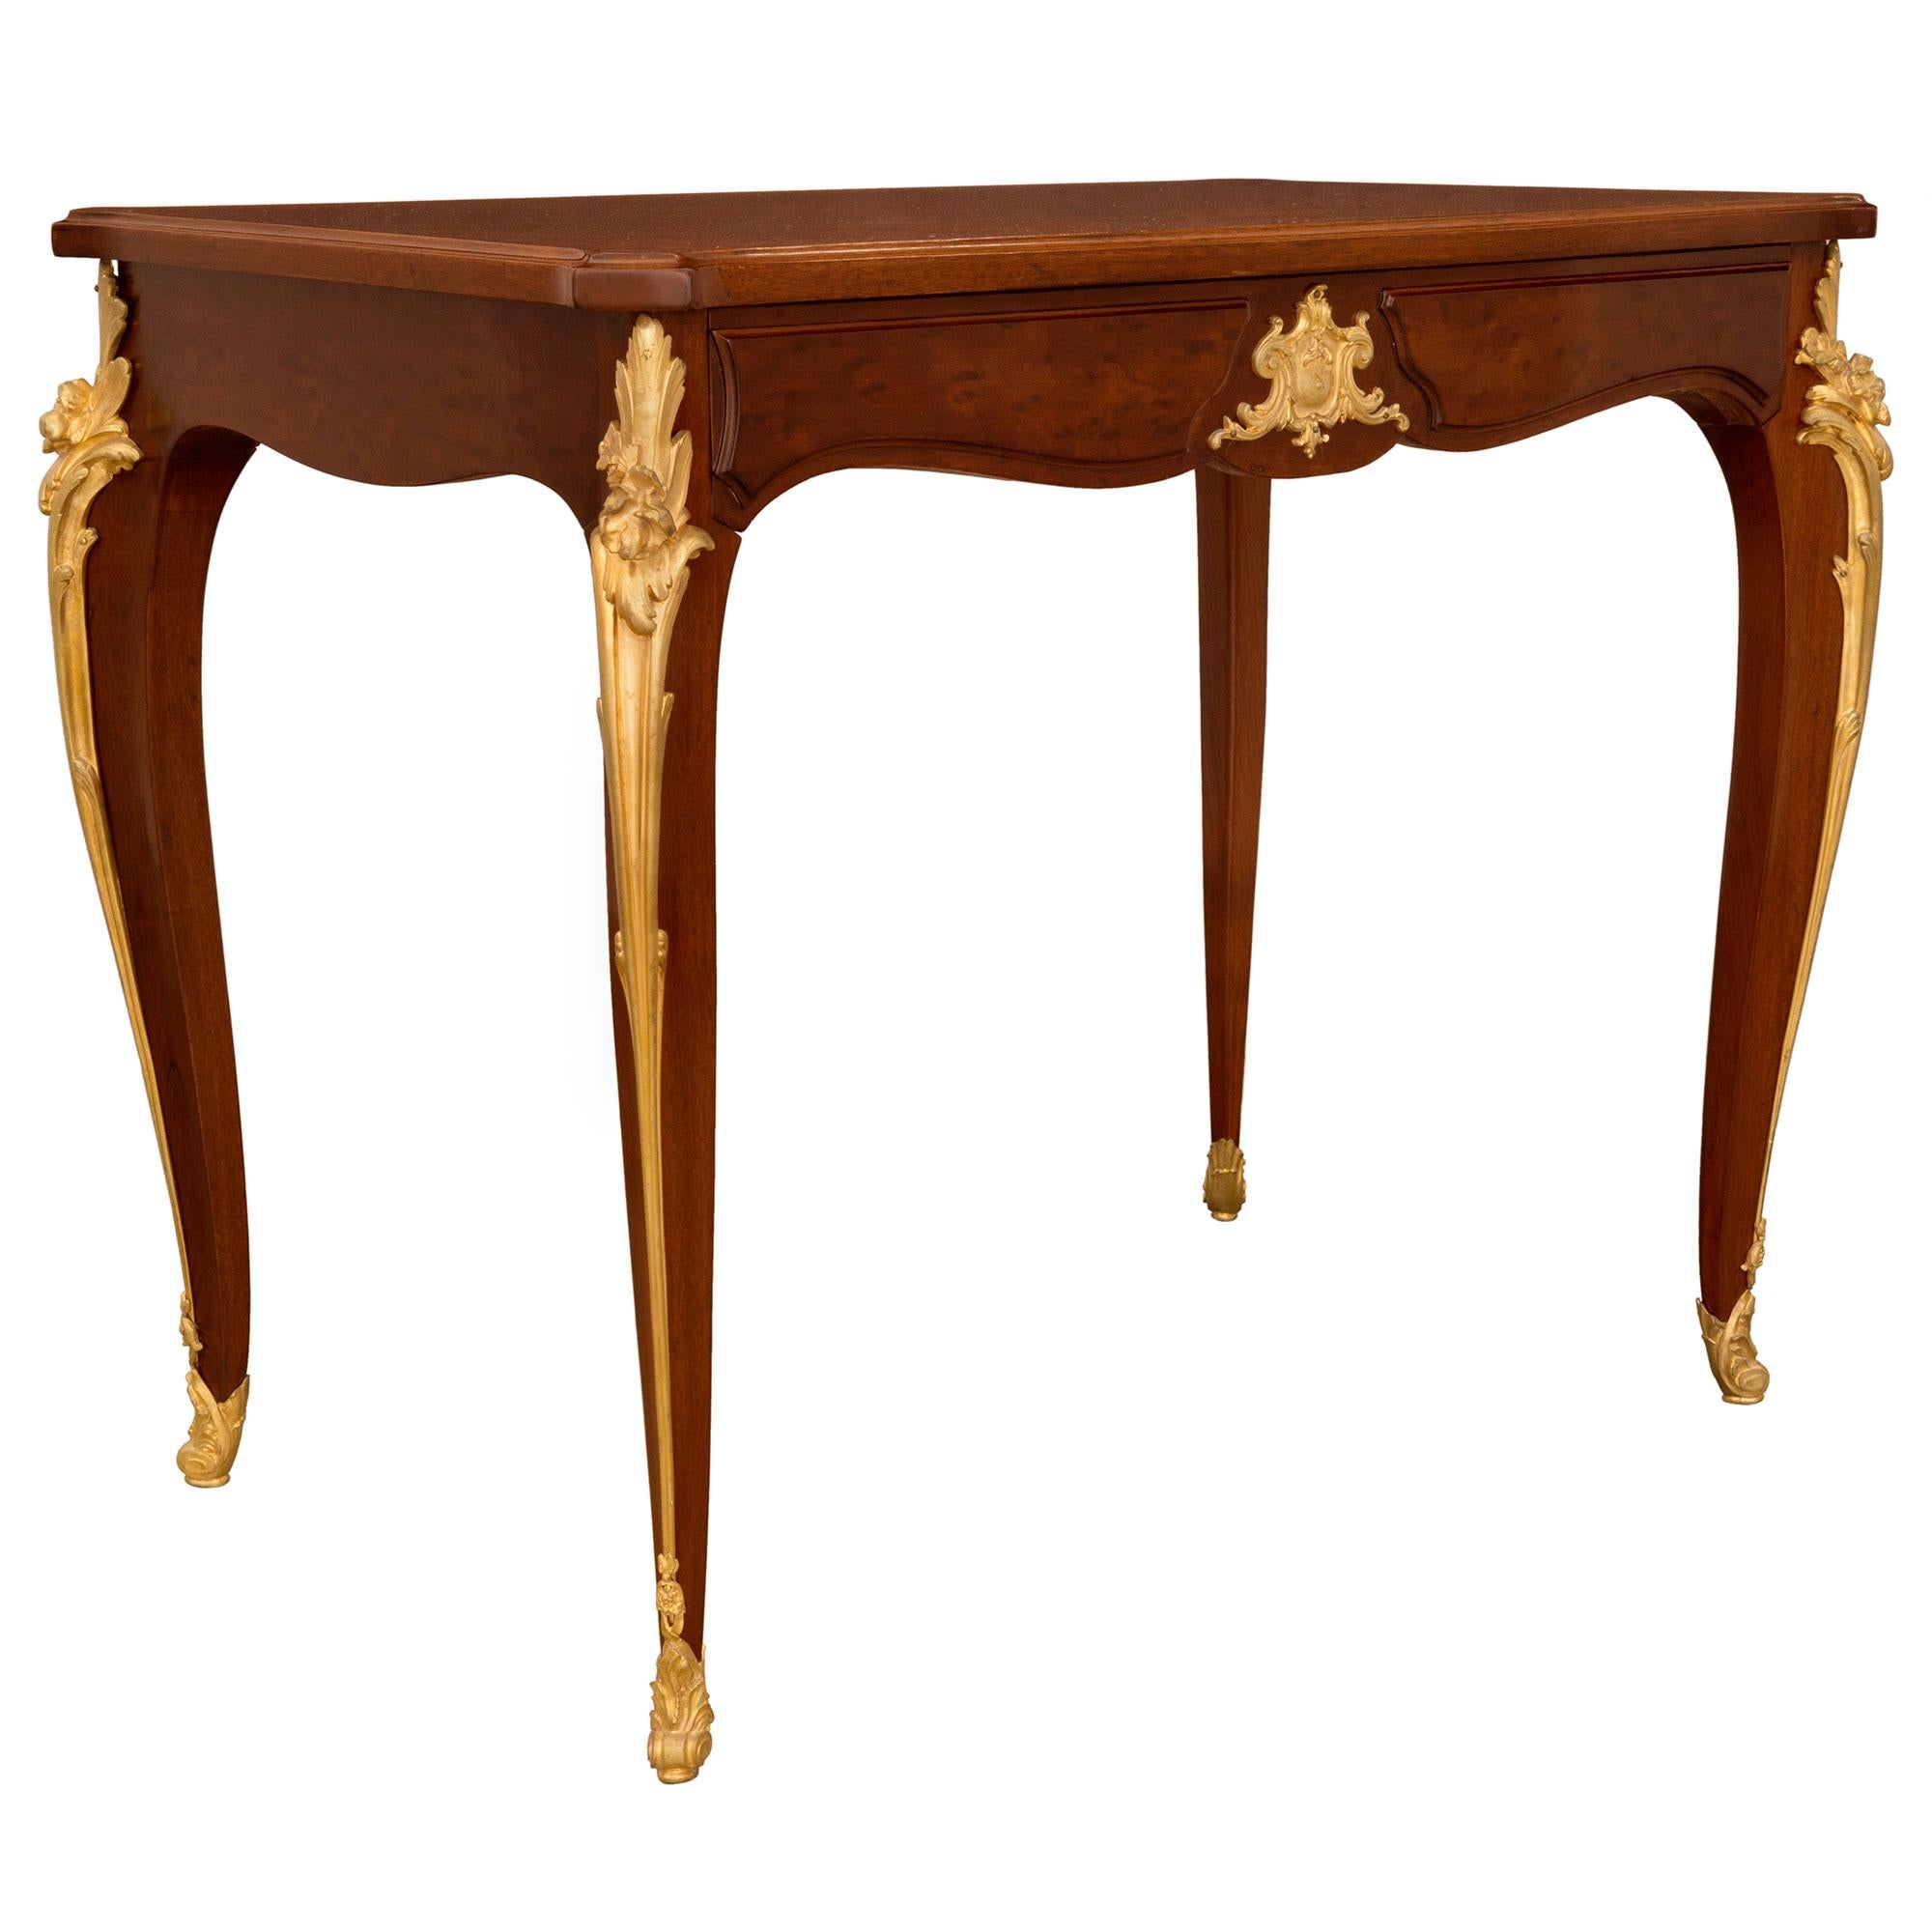 French 19th Century Louis XV Style Mahogany and Ormolu Center Table/Desk In Good Condition For Sale In West Palm Beach, FL